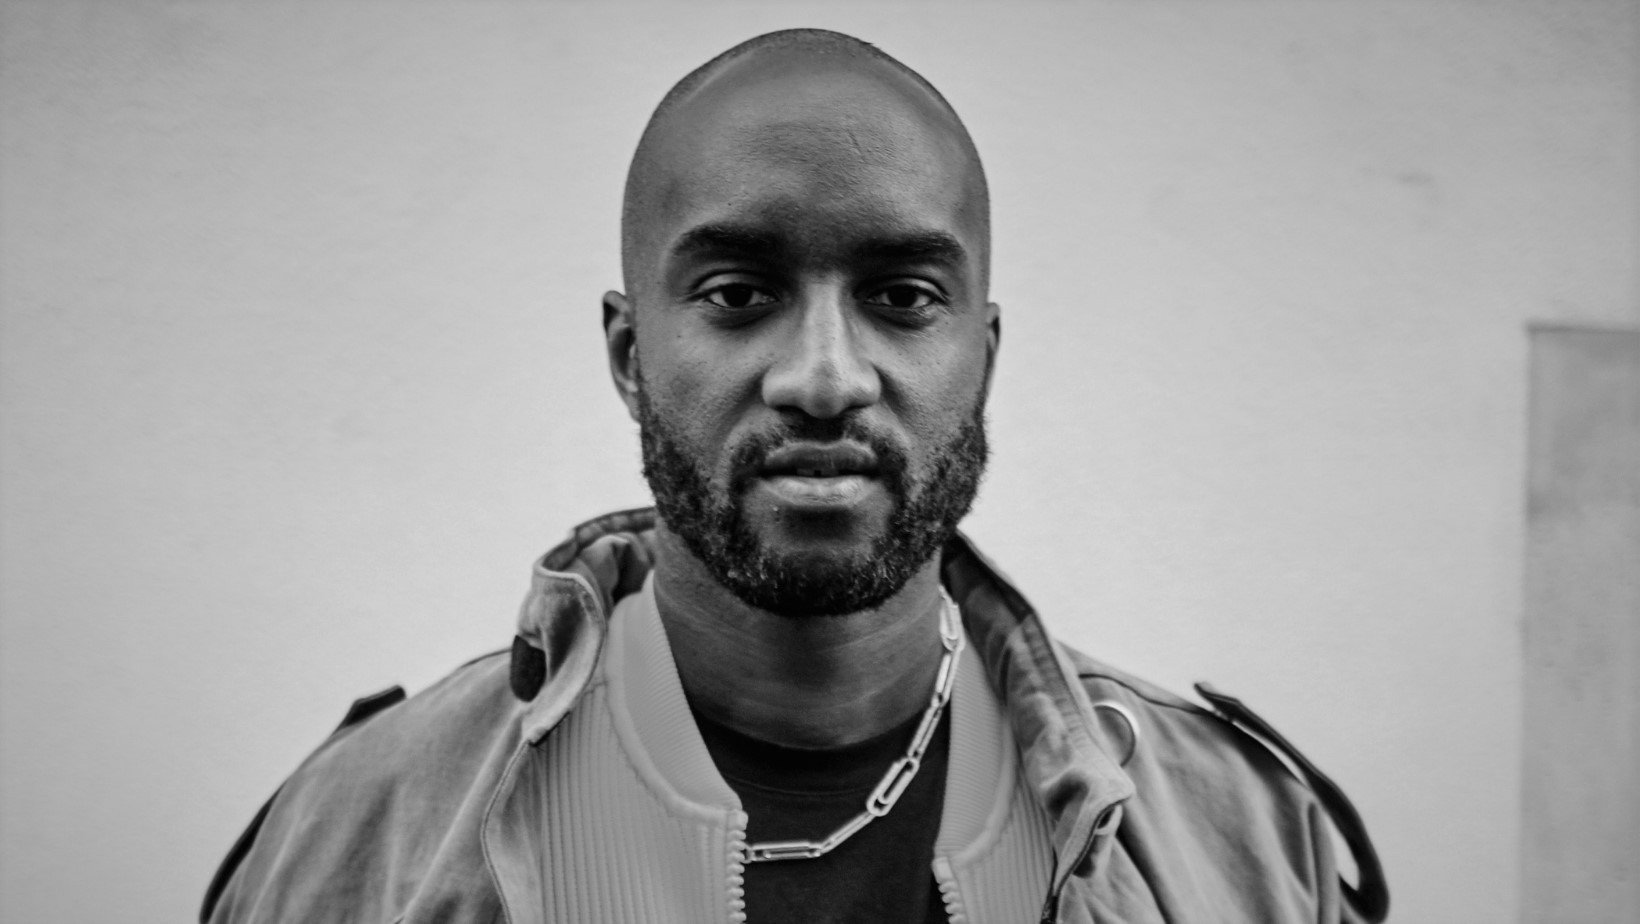 Virgil Abloh, fashion designer, artistic director of Louis Vuitton and founder of Off-White, has passed away.  He was 41 years old